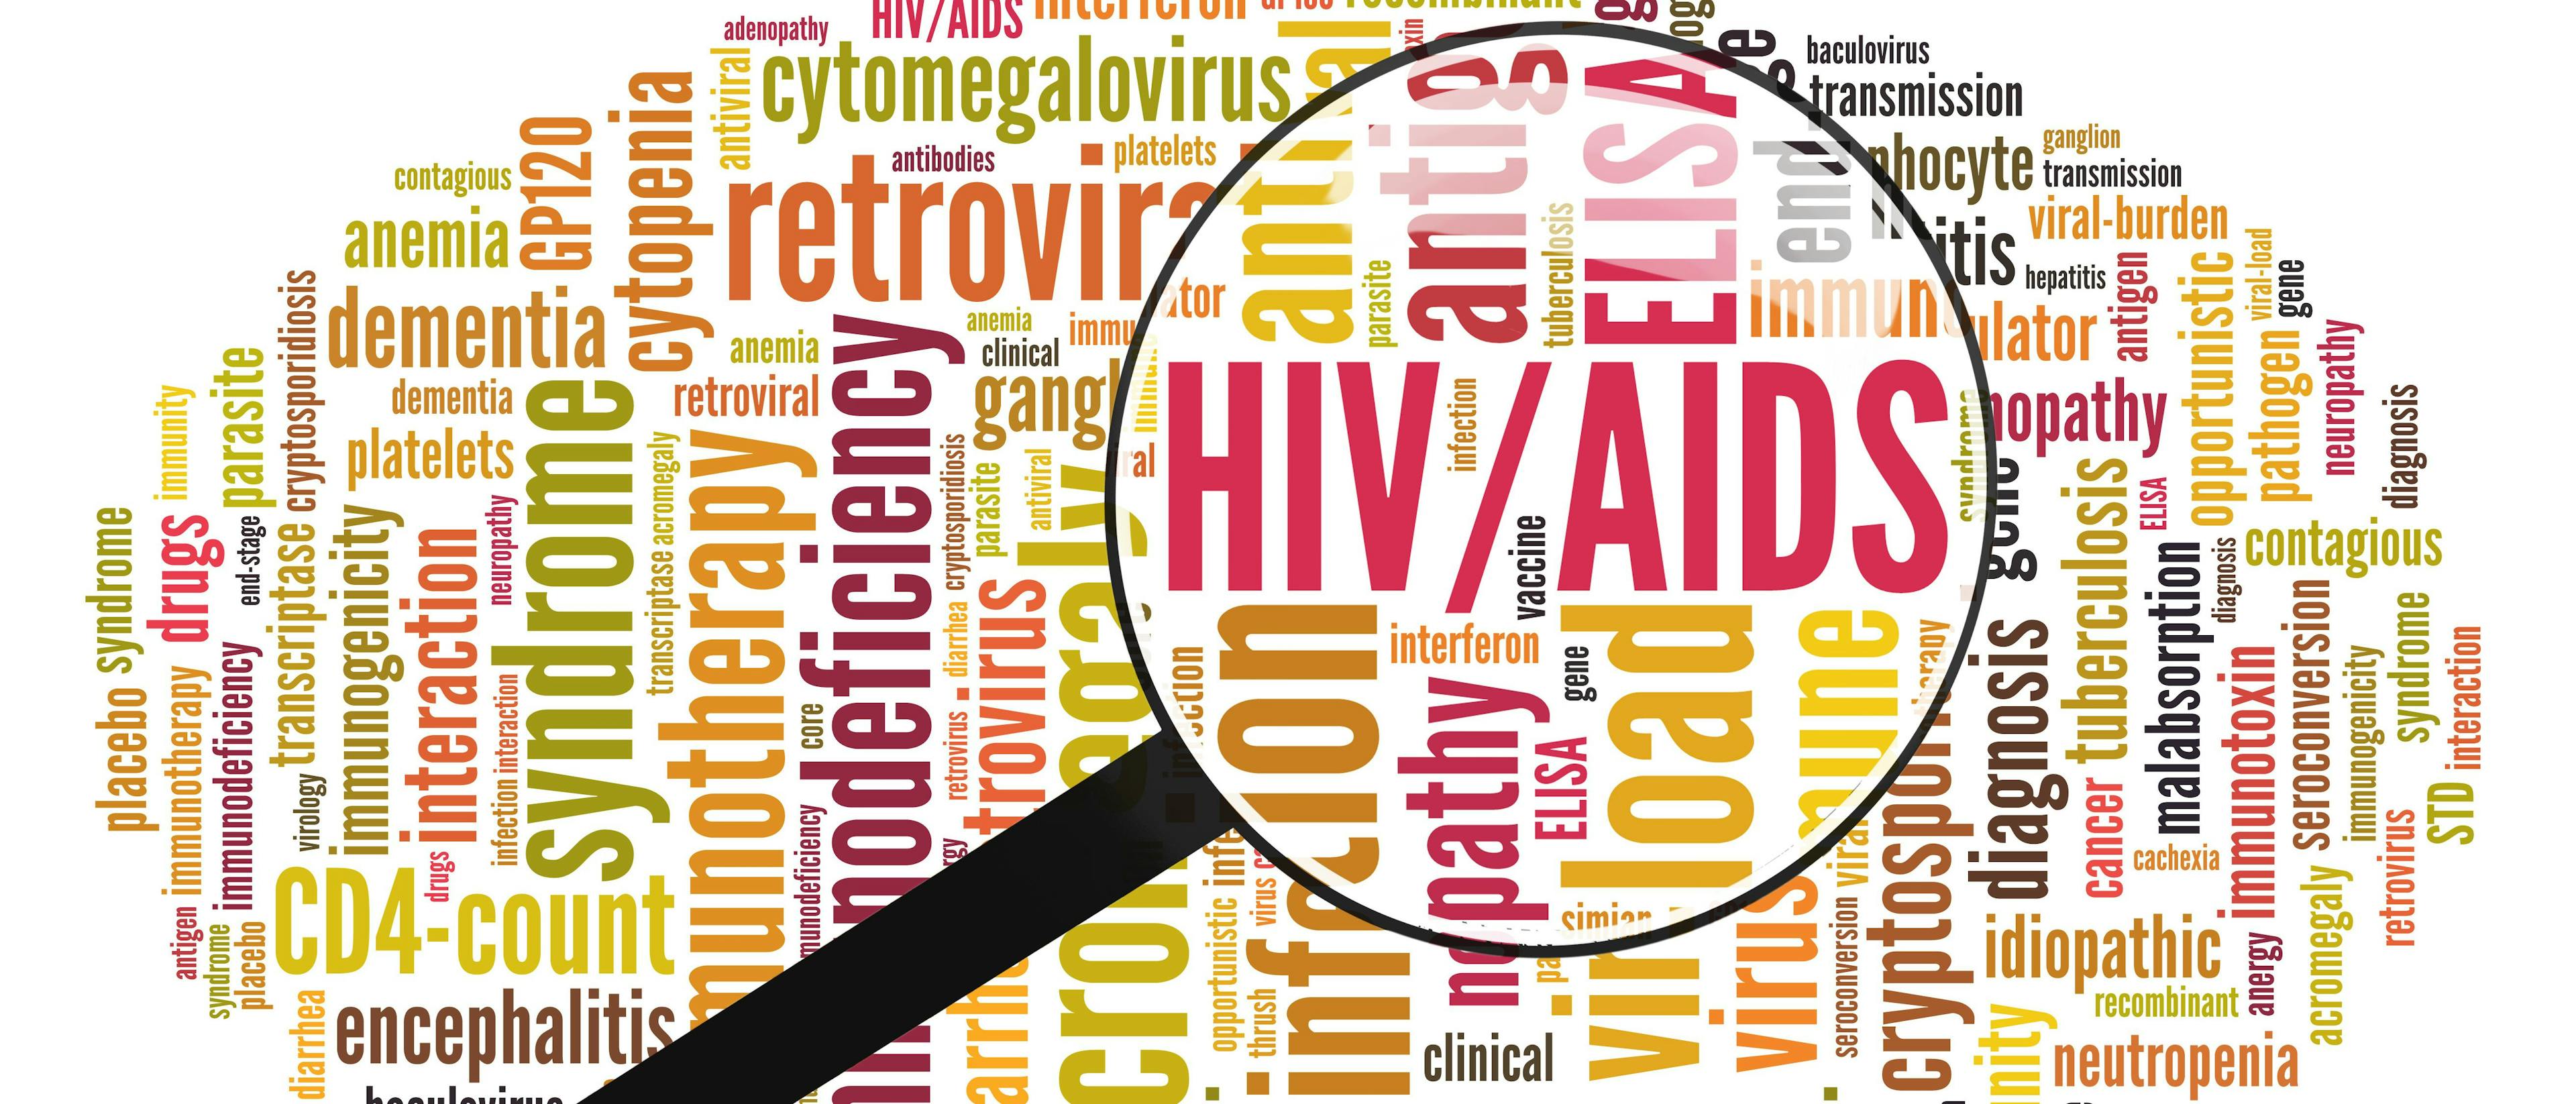 The Evolution of the HIV Epidemic and the Role of Pharmacists: Where Are We 35 Years Later?